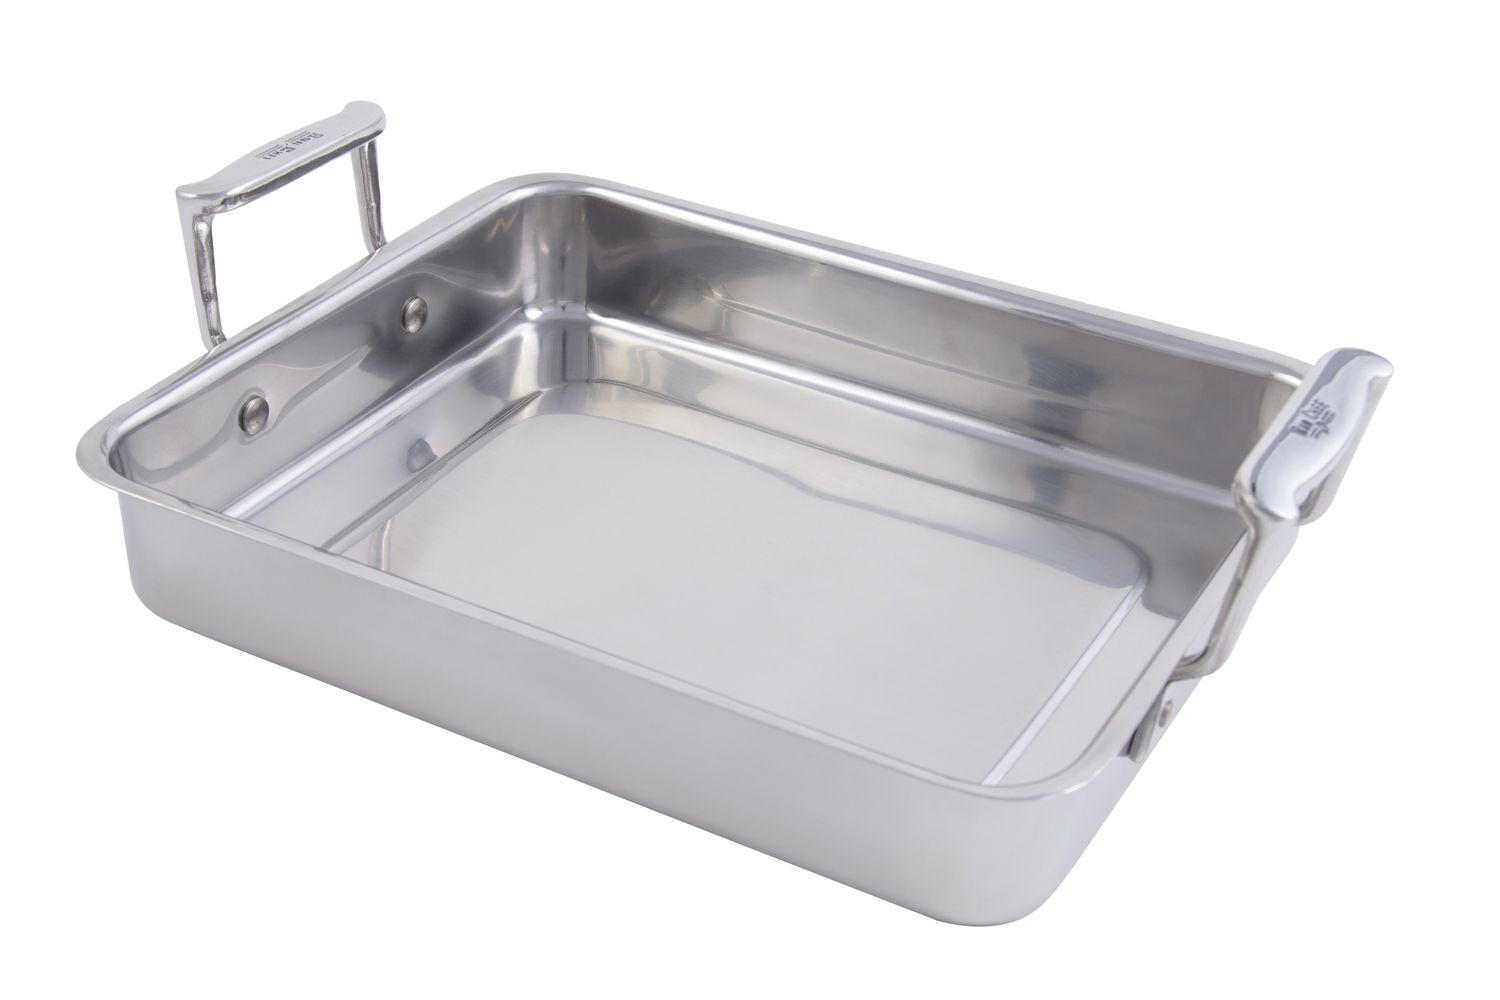 Bon Chef 60013 Cucina Small Stainless Steel Food Pan with Handles, 3 Qt.